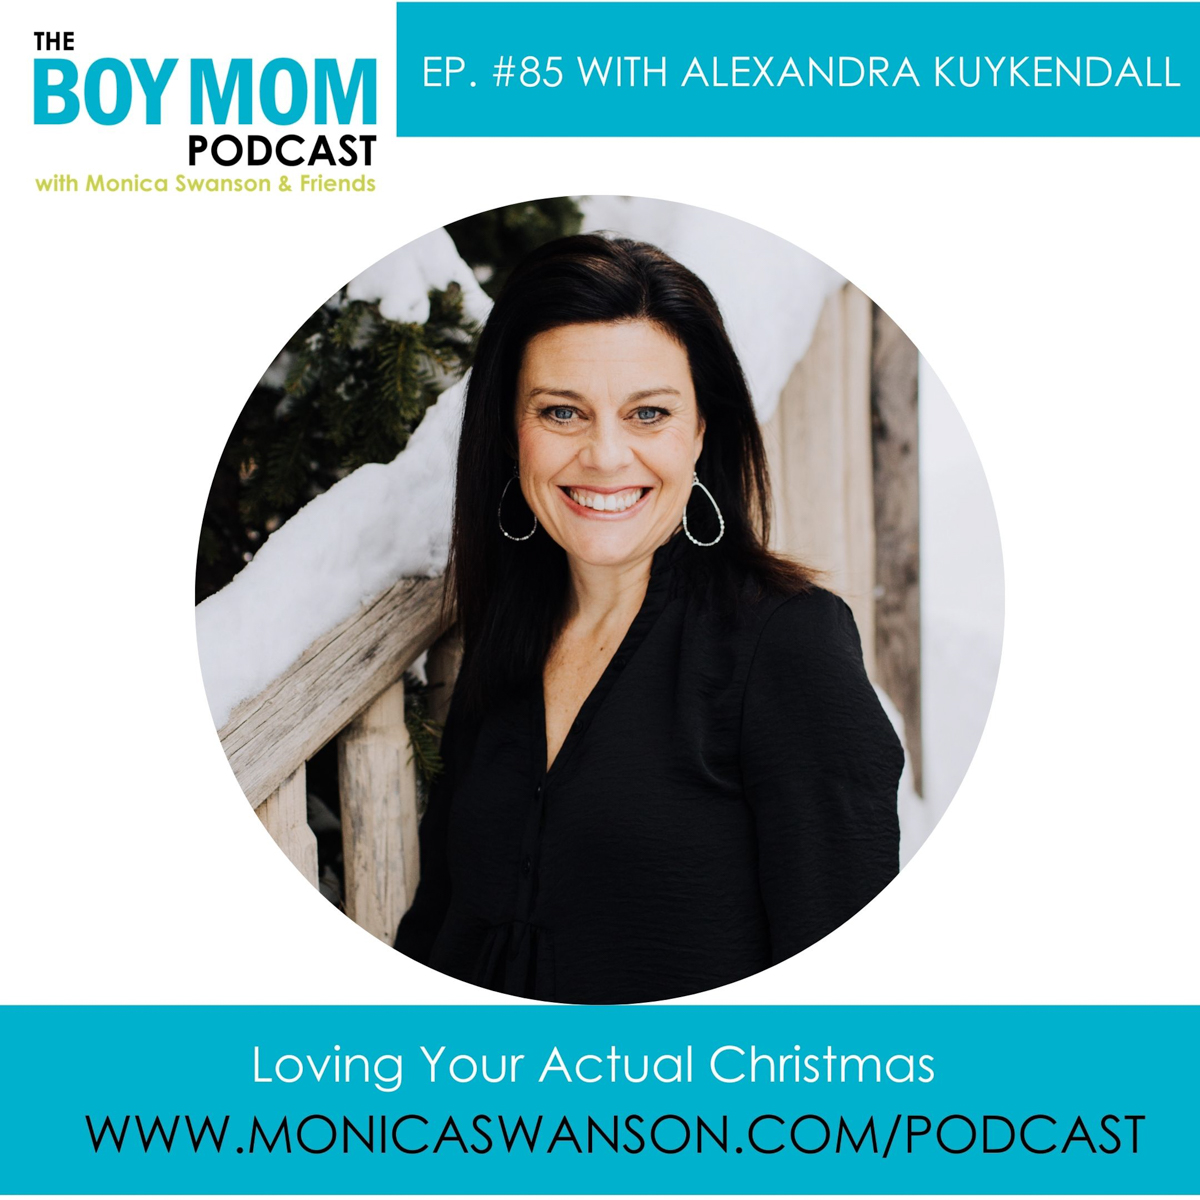 How to Love Your Actual Christmas {Episode 85 with Alexandra Kuykendall}